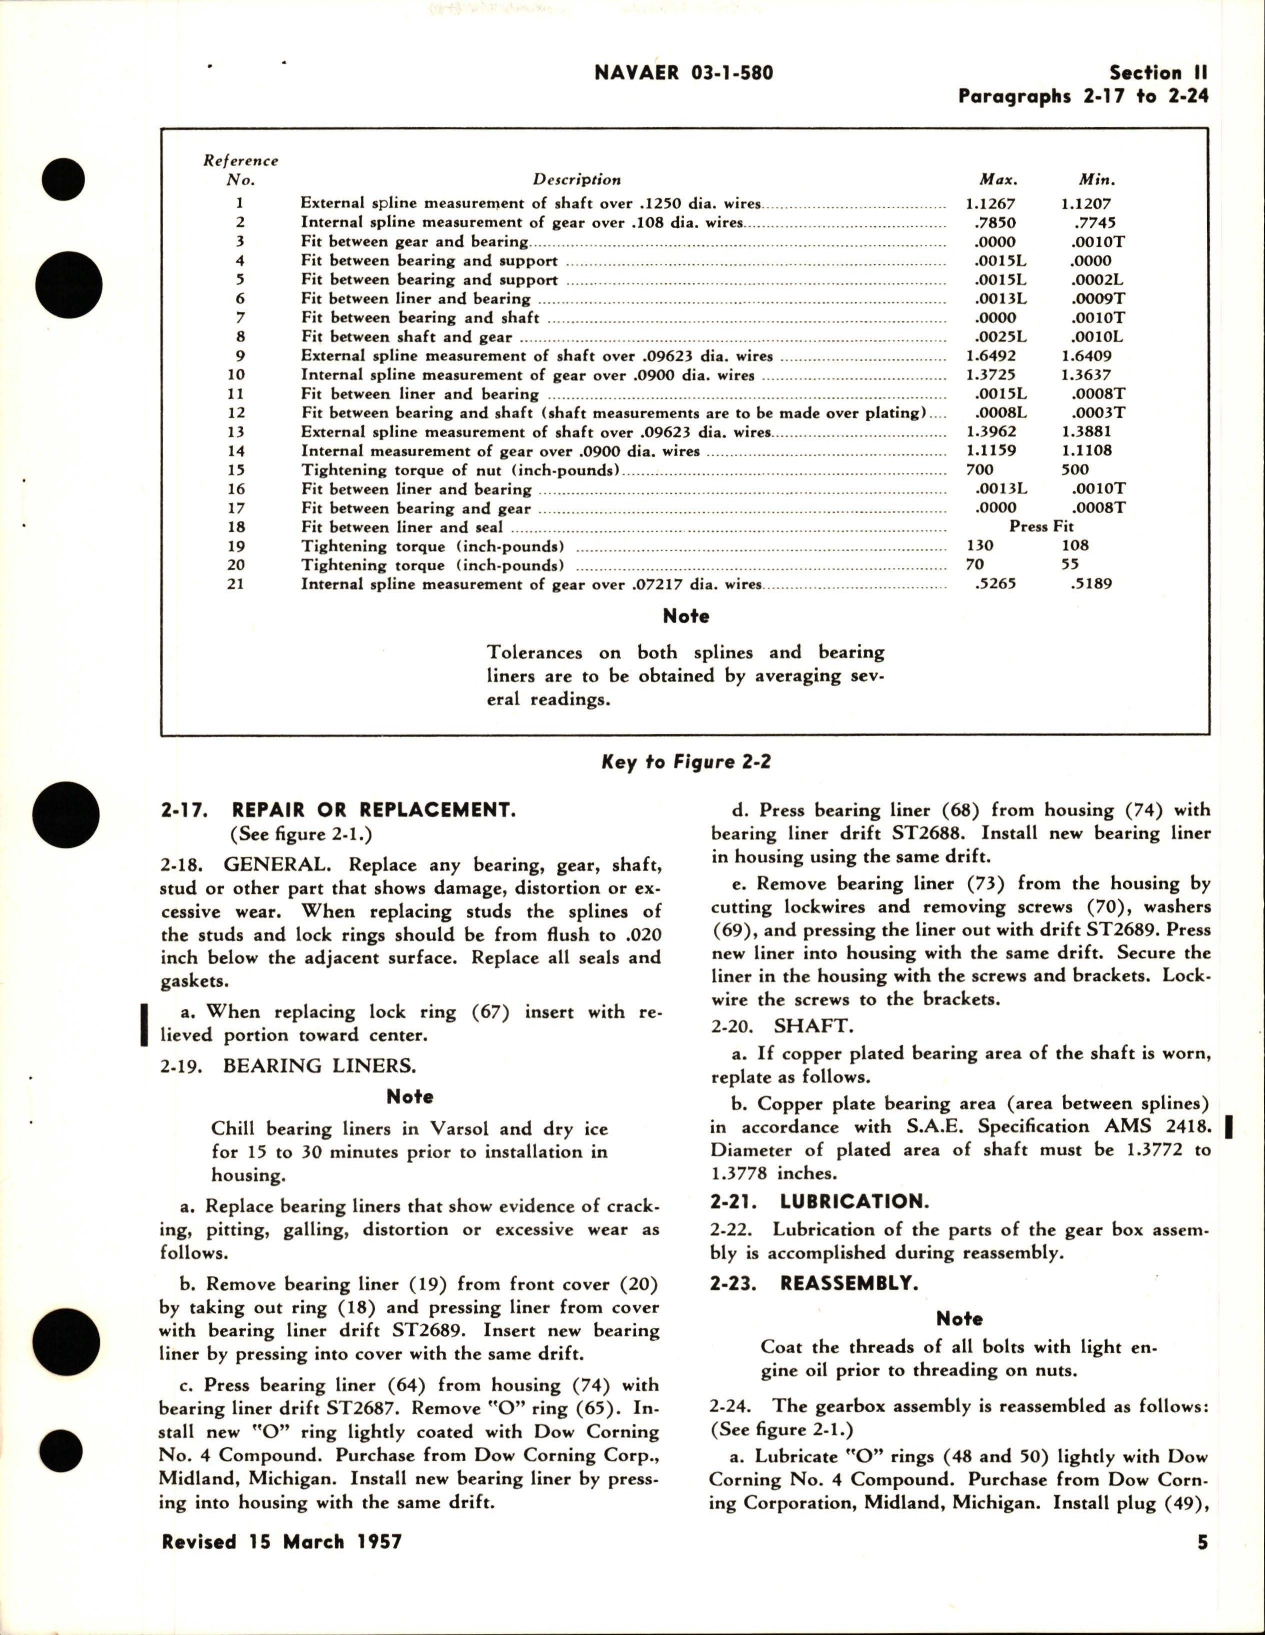 Sample page 7 from AirCorps Library document: Overhaul Instructions for Accessory Drive Gearbox Assembly - Part 135897 